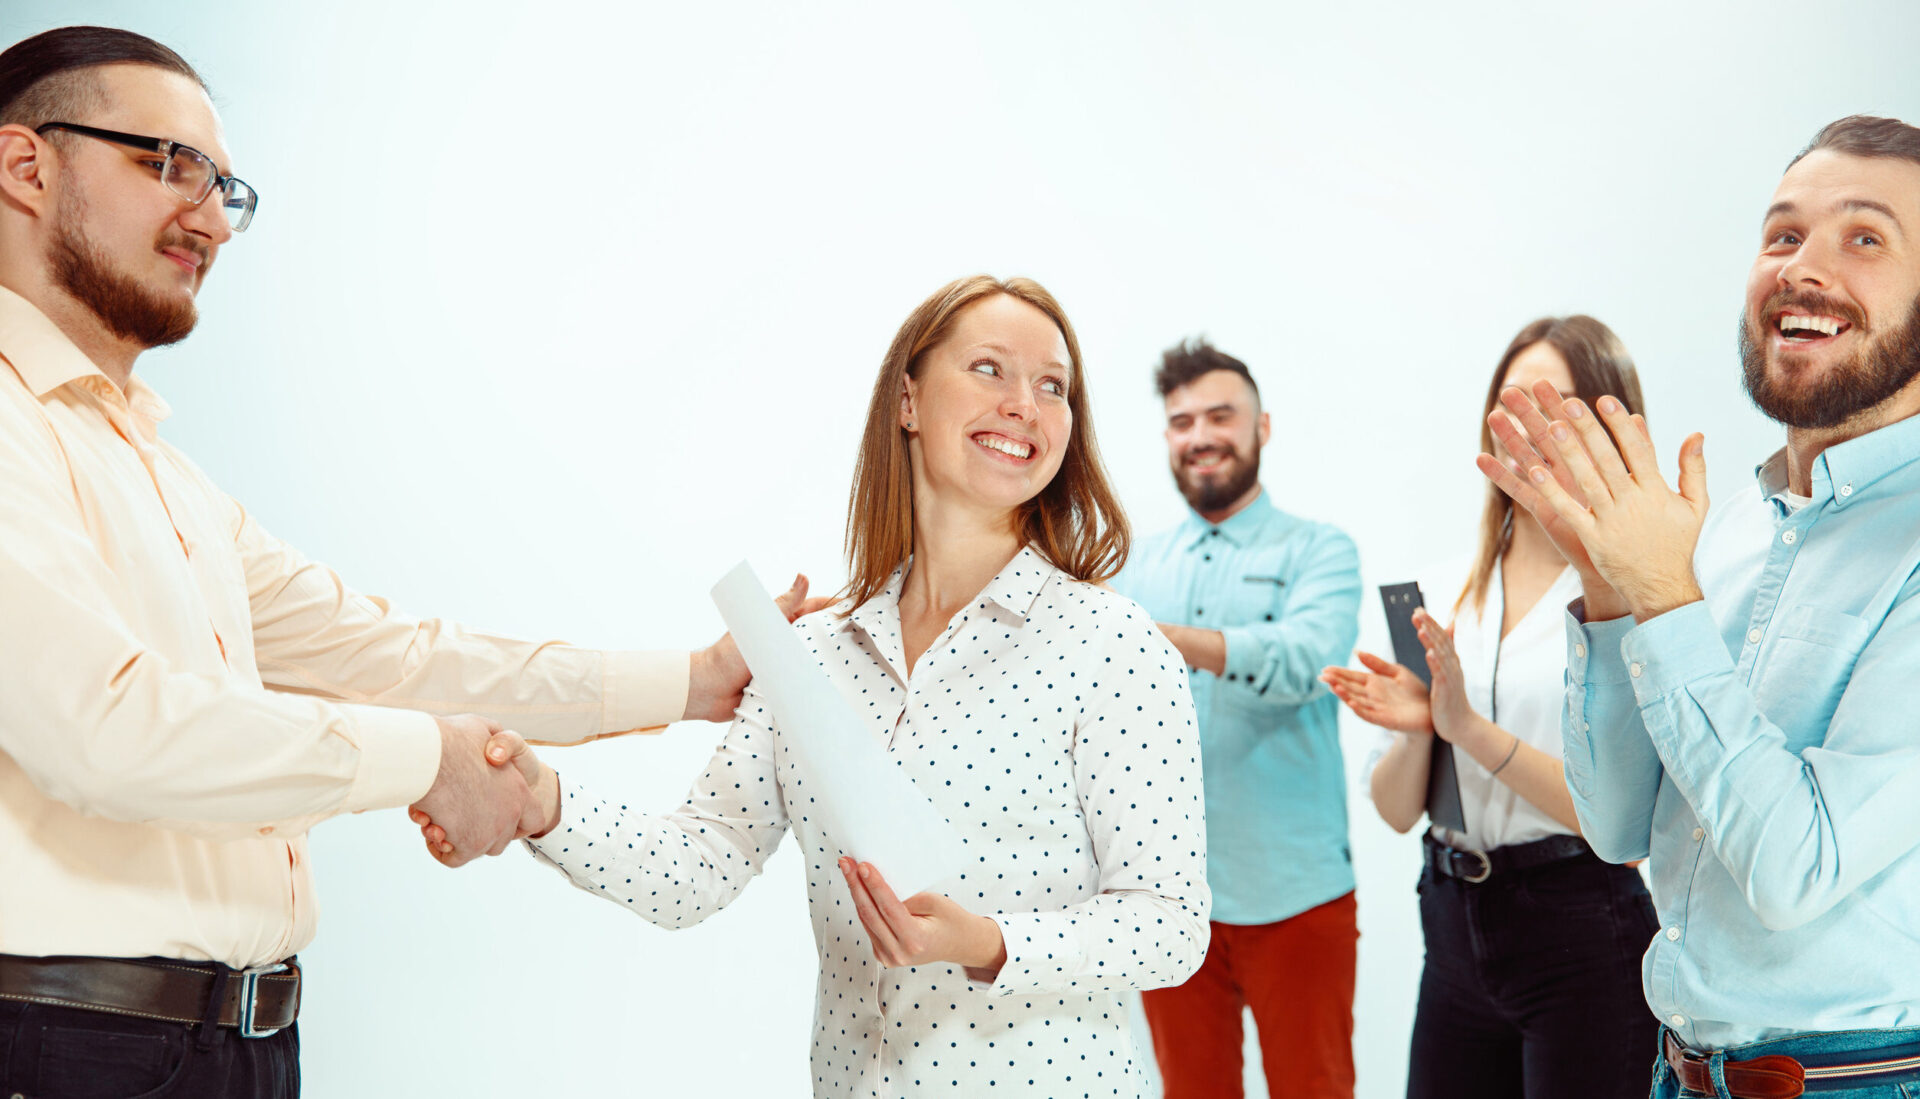 Are You Happy with Your Employee Reward Programs? | HRDQ-U Blog